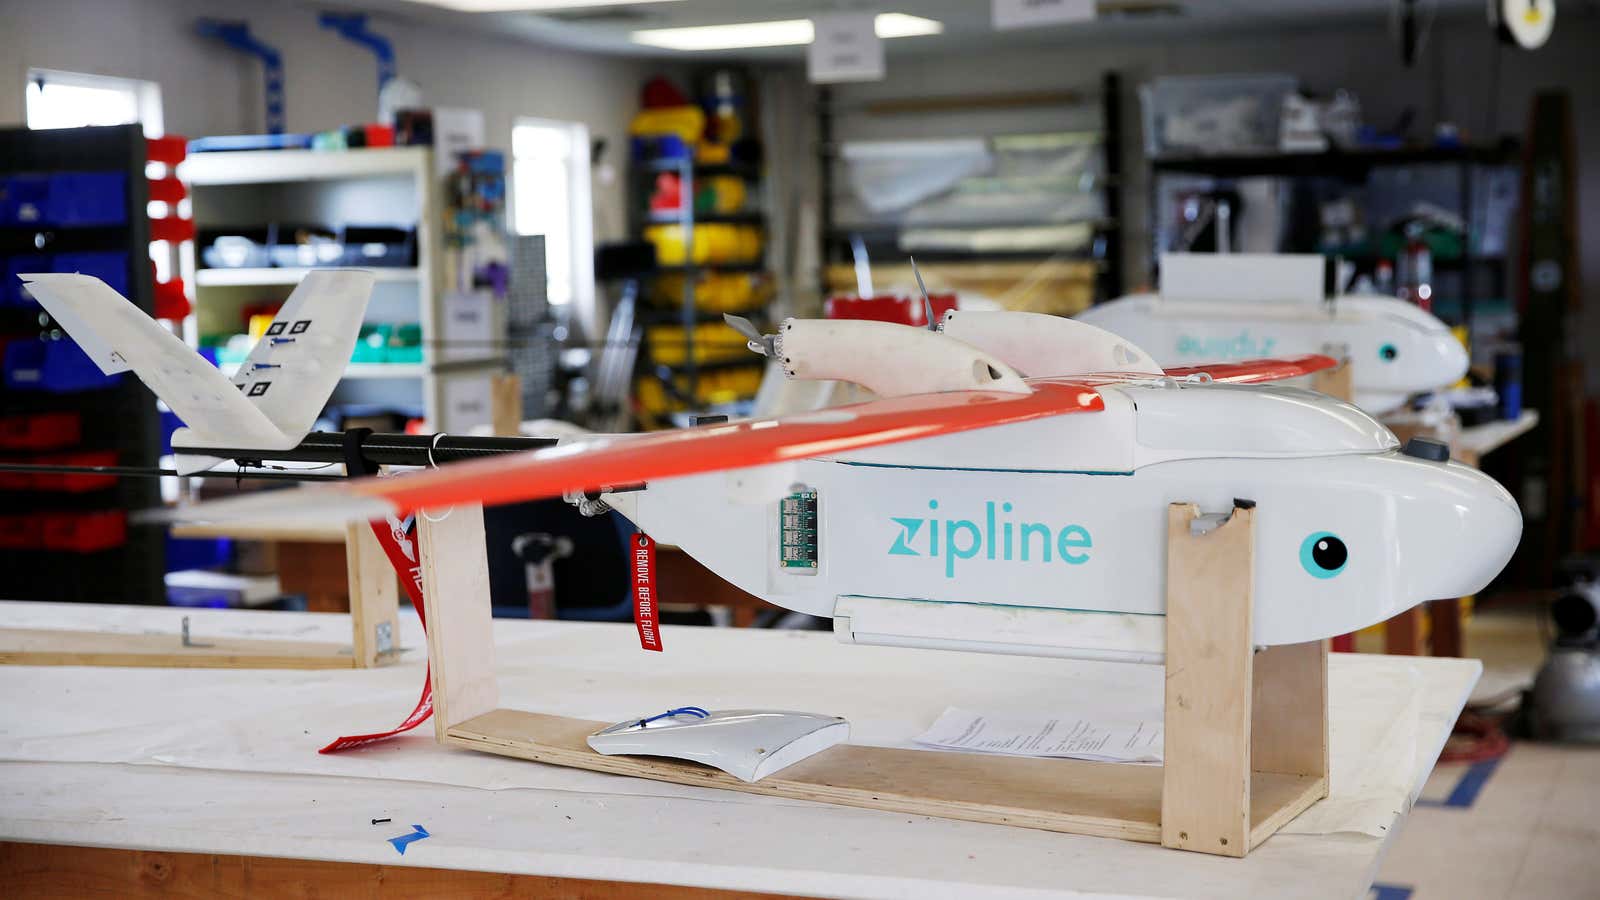 Zipline has evolved its drone designs since launch in 2016